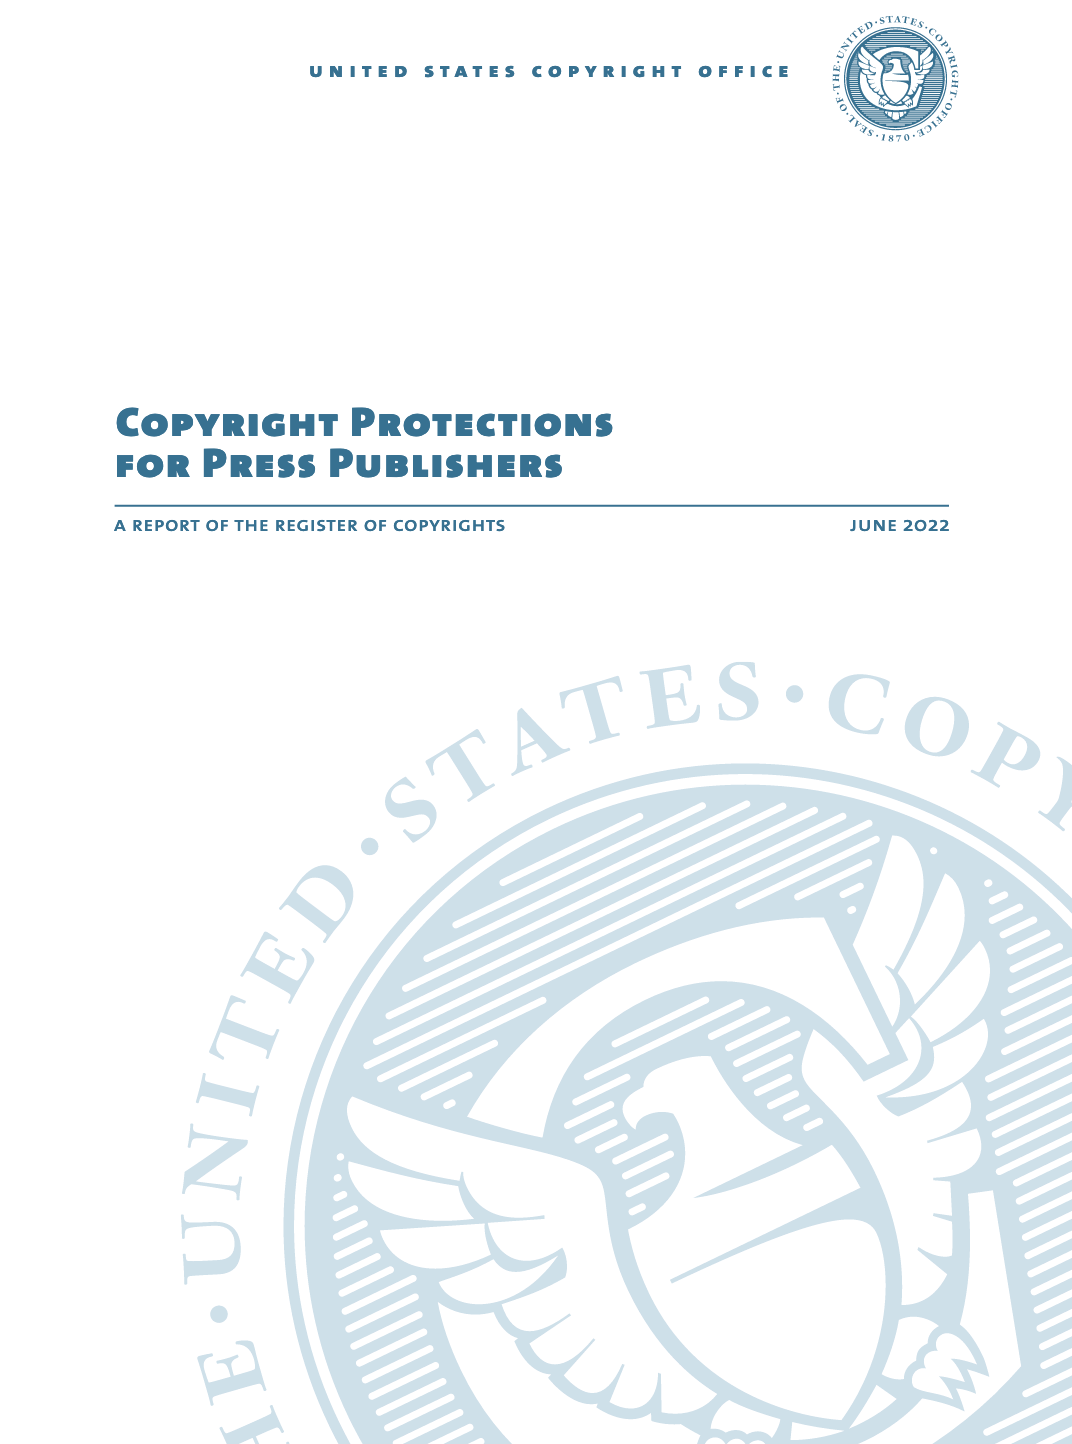 Just Released: U.S. Copyright Office Publishes Report on Copyright Protections For Press Publishers